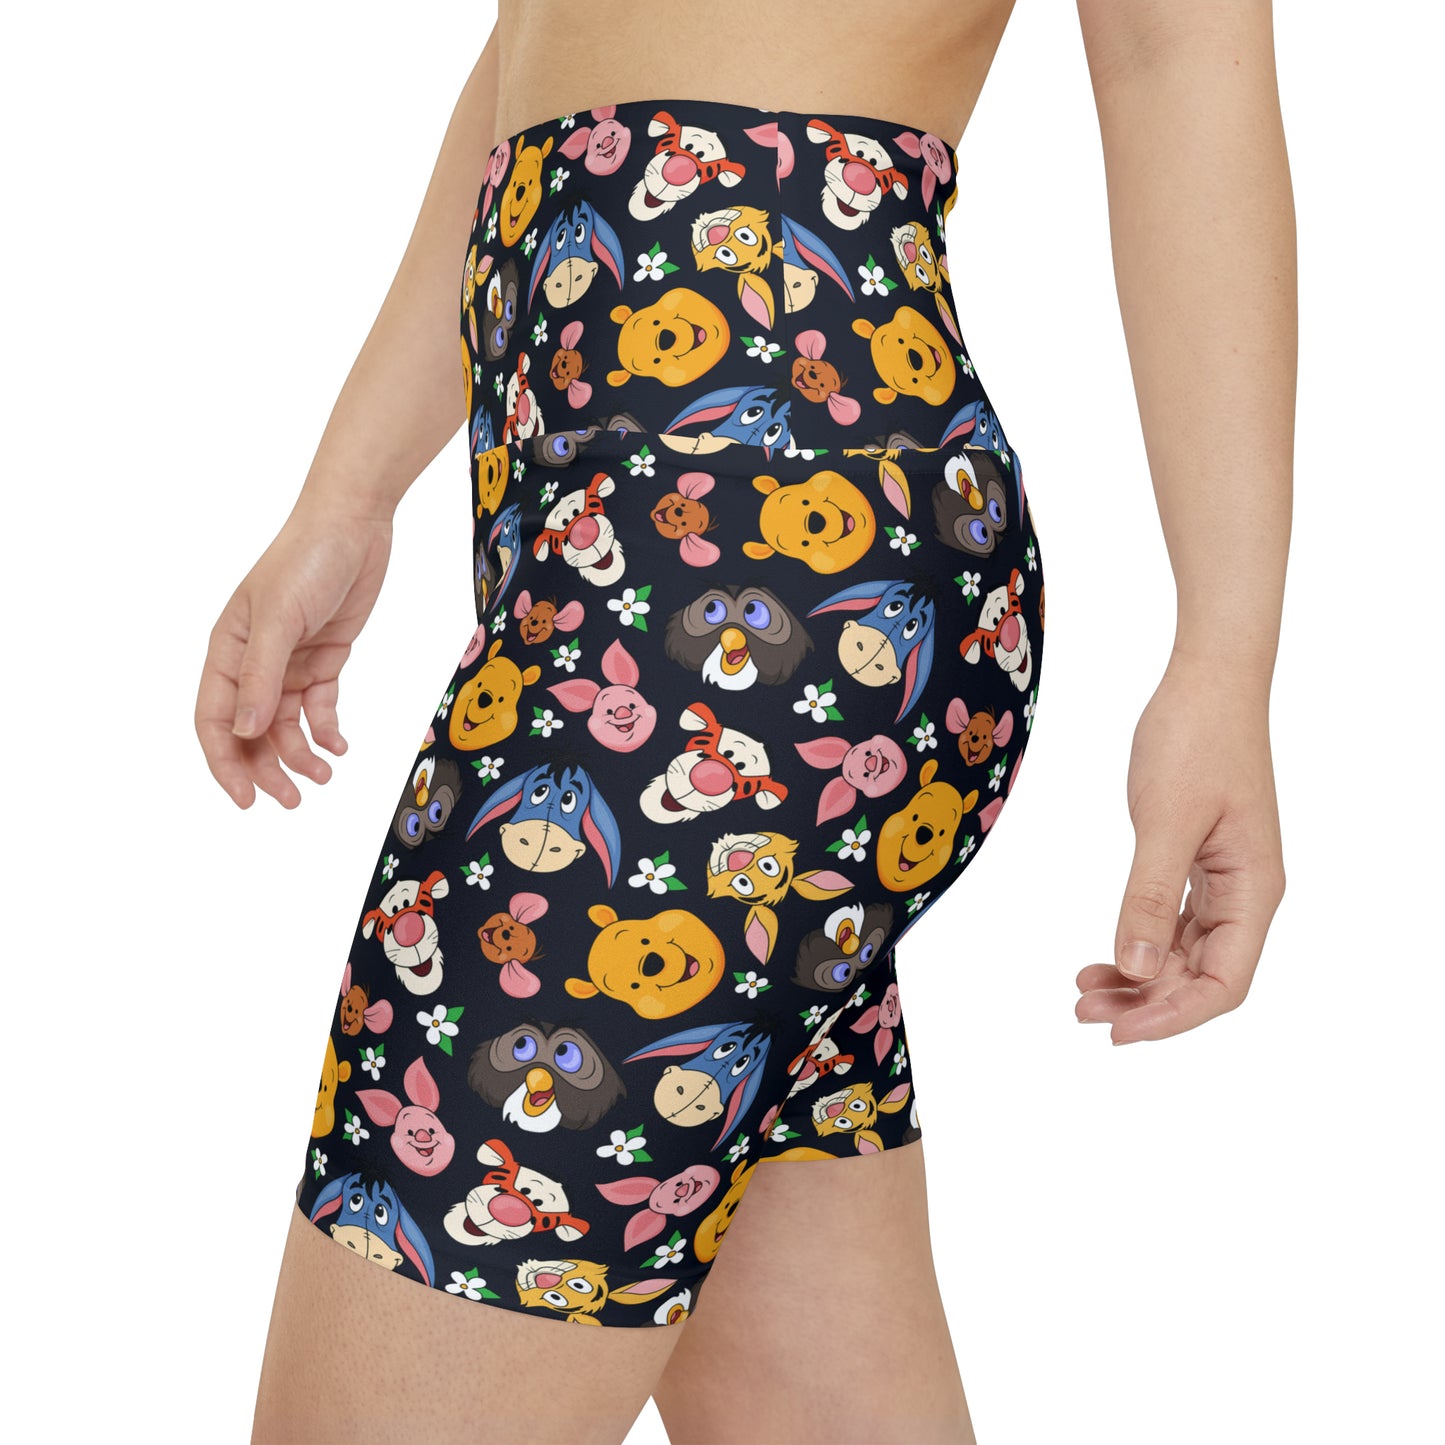 Hundred Acre Woods Friend Women's Athletic Workout Shorts